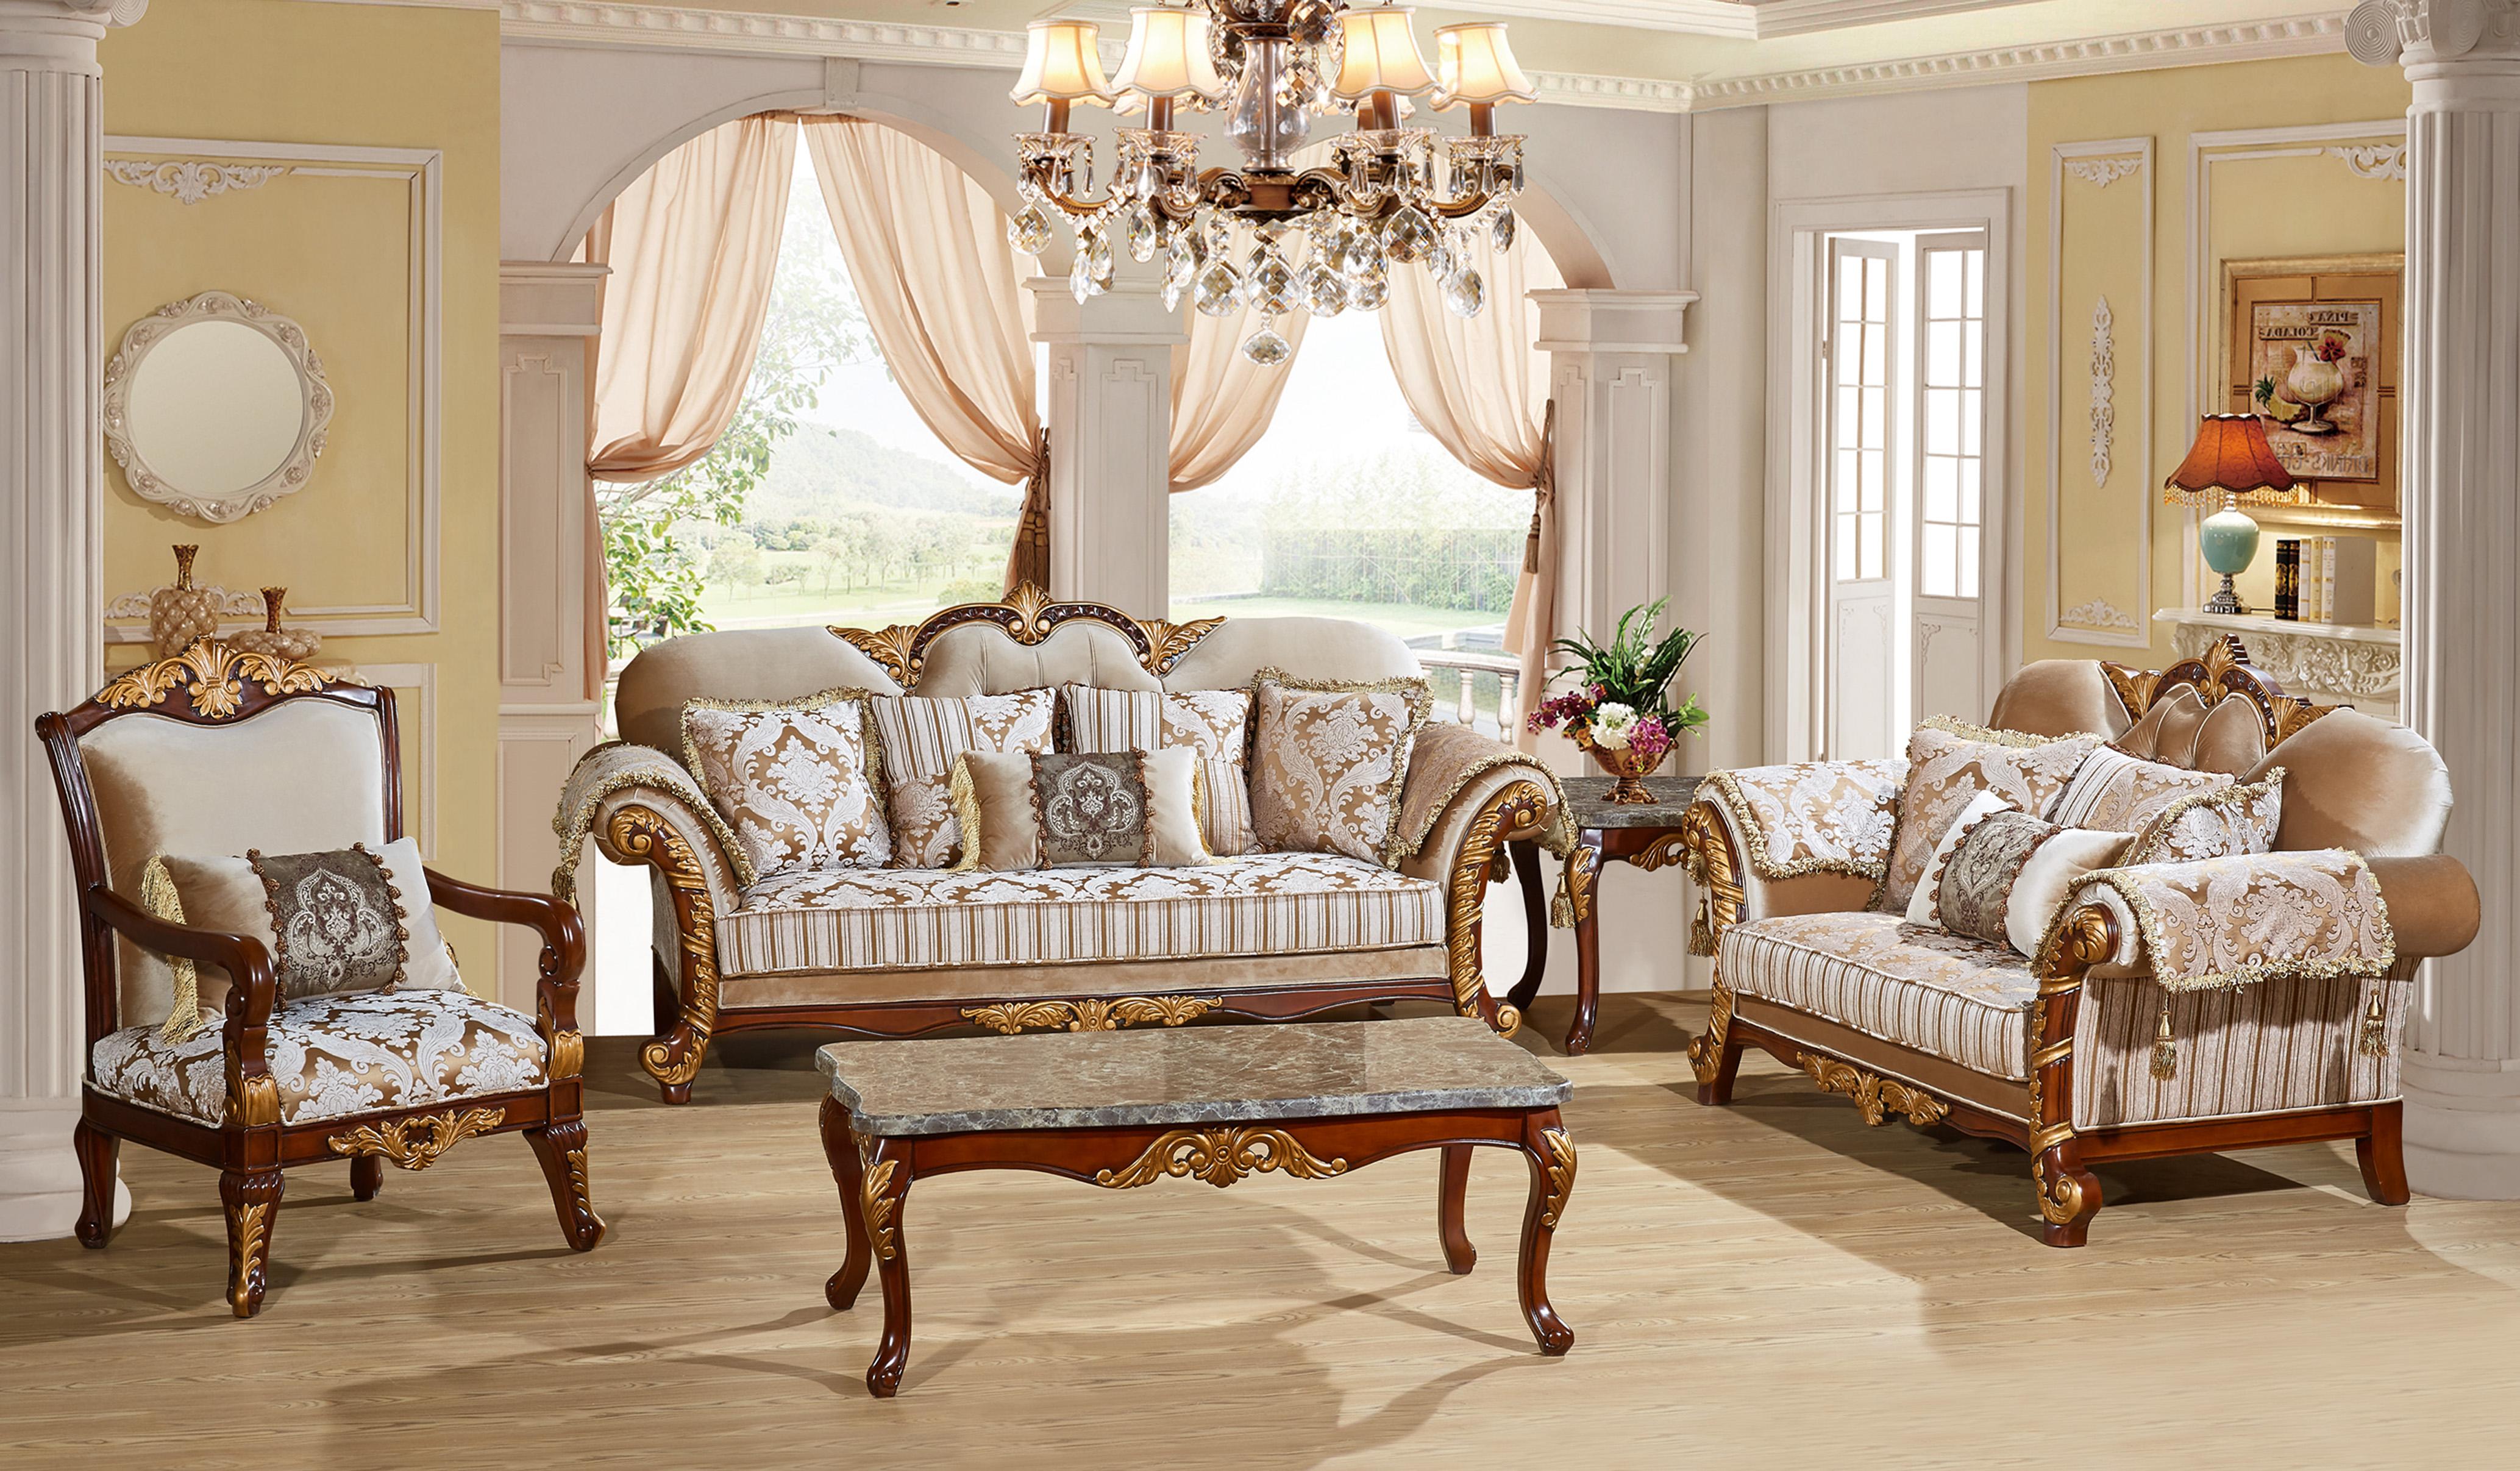 

    
Meridian 651 Camelia Cream w/Gold Living Room Set 3Pcs Carved Wood Traditional
